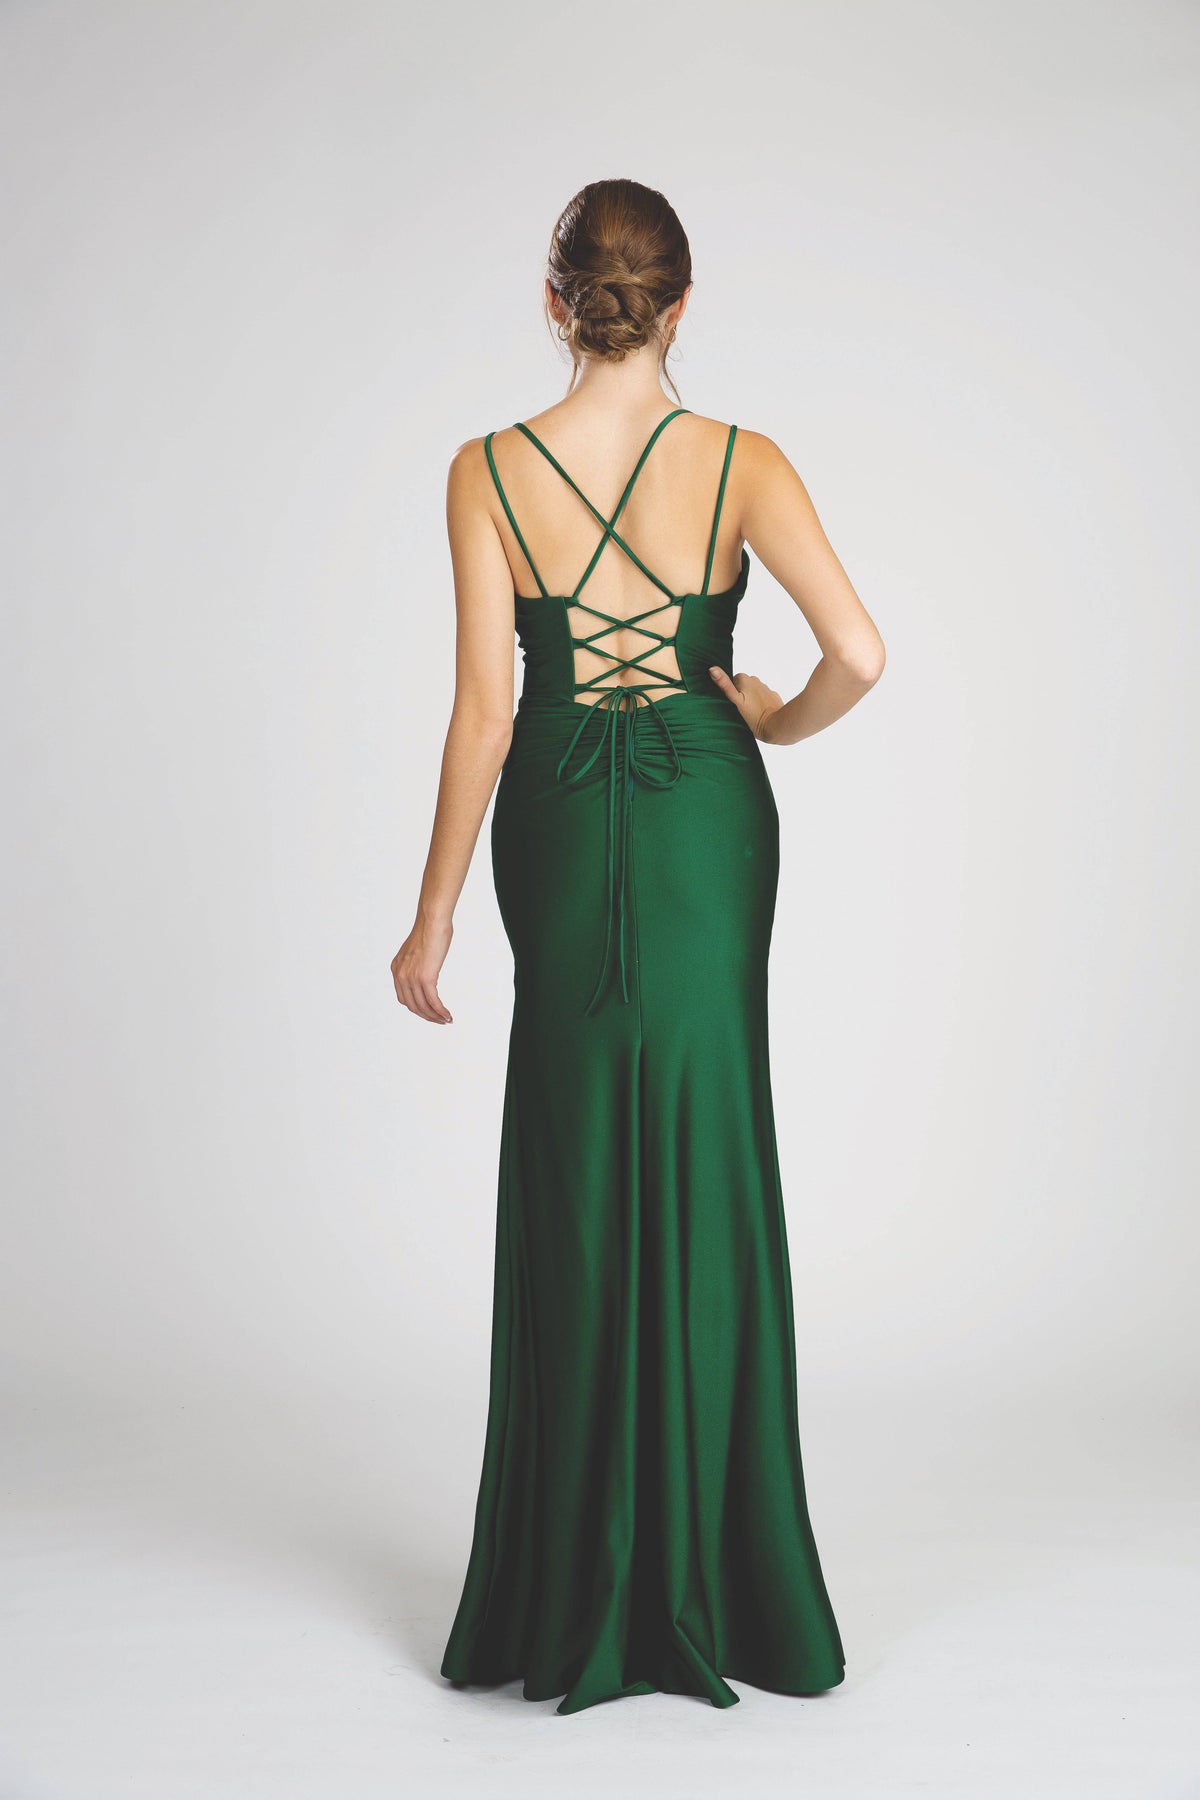 Review Womens Cocktail Dress Fit and Flare Pale Green Evening Prom Size 10